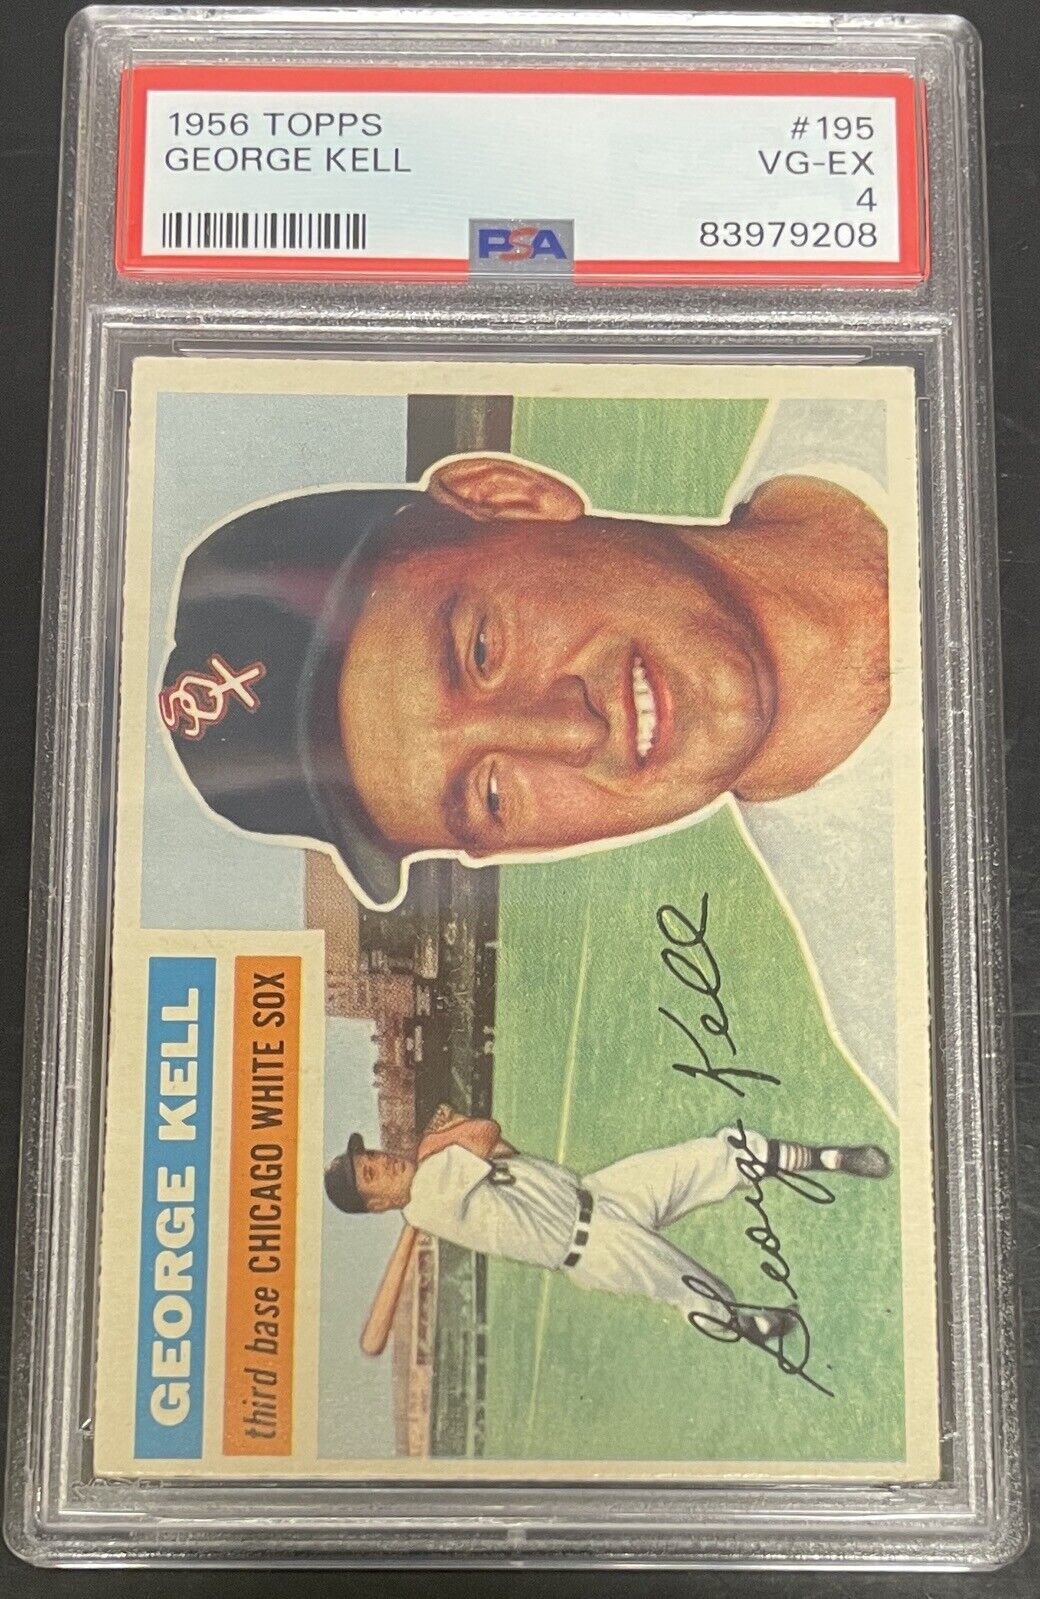 1956 Topps GEORGE KELL Vintage Card #195 Chicago White Sox 208 PSA 4